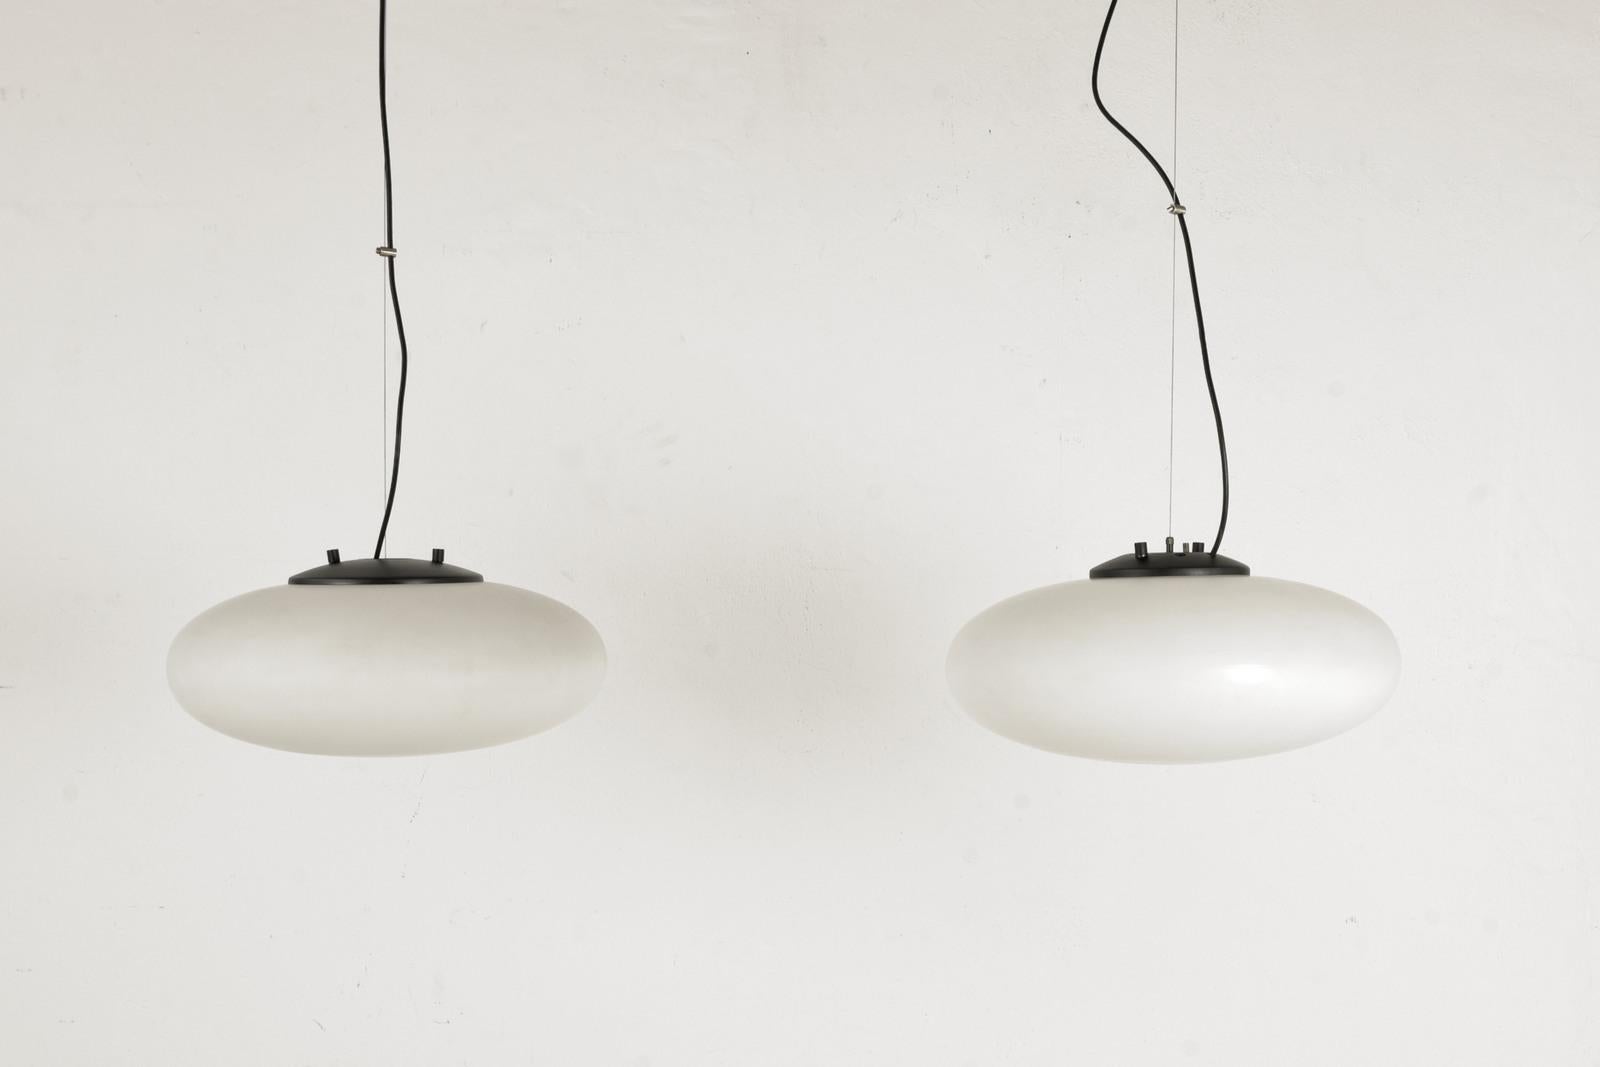 Mid-20th Century 1 of 2 Pendant Lamps by Stilnovo, Italy - 1960s  For Sale